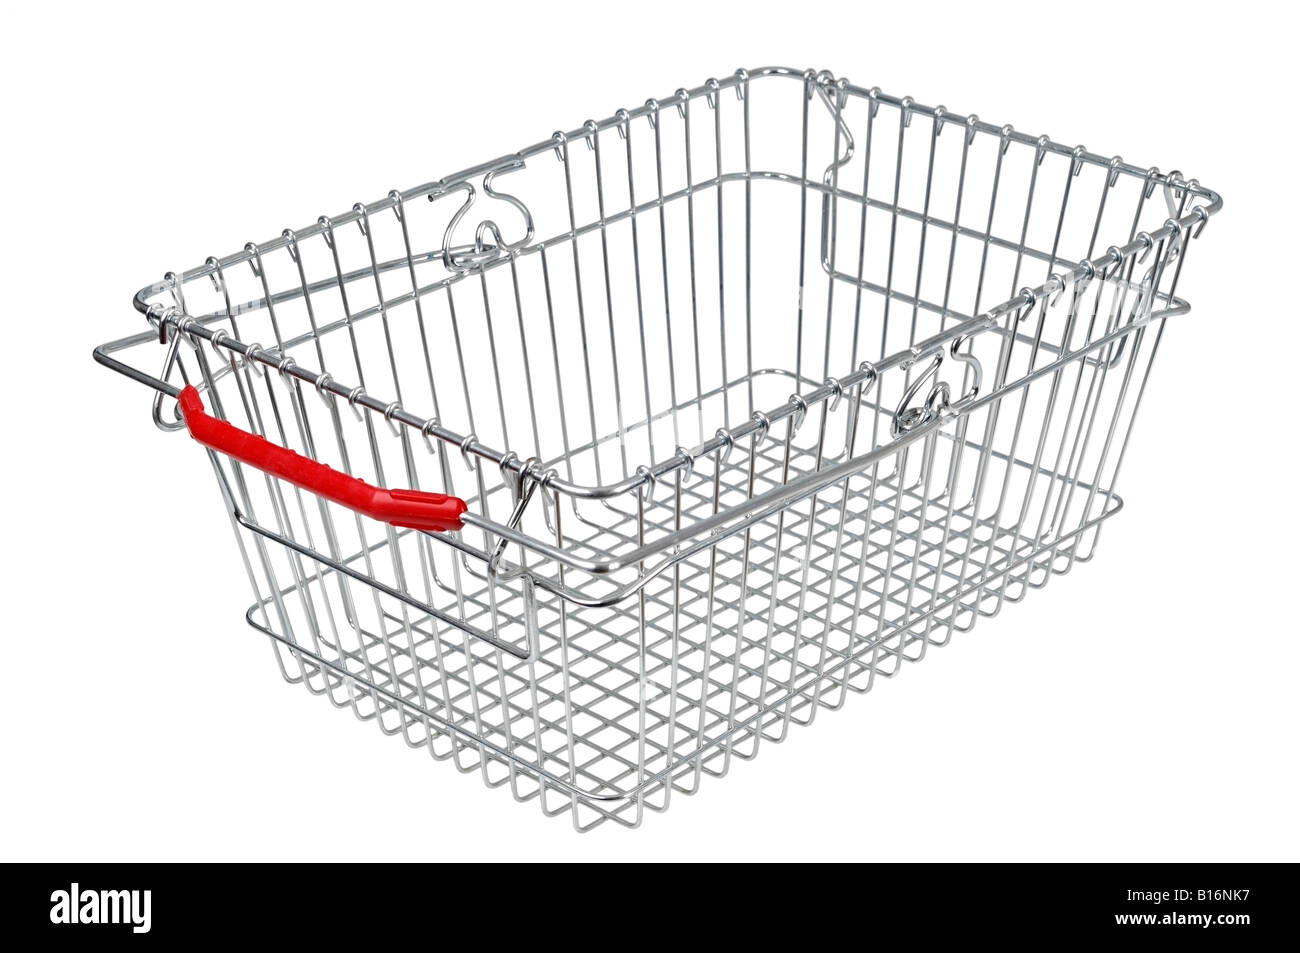 Empty Shopping Basket Against a White Background Stock Photo